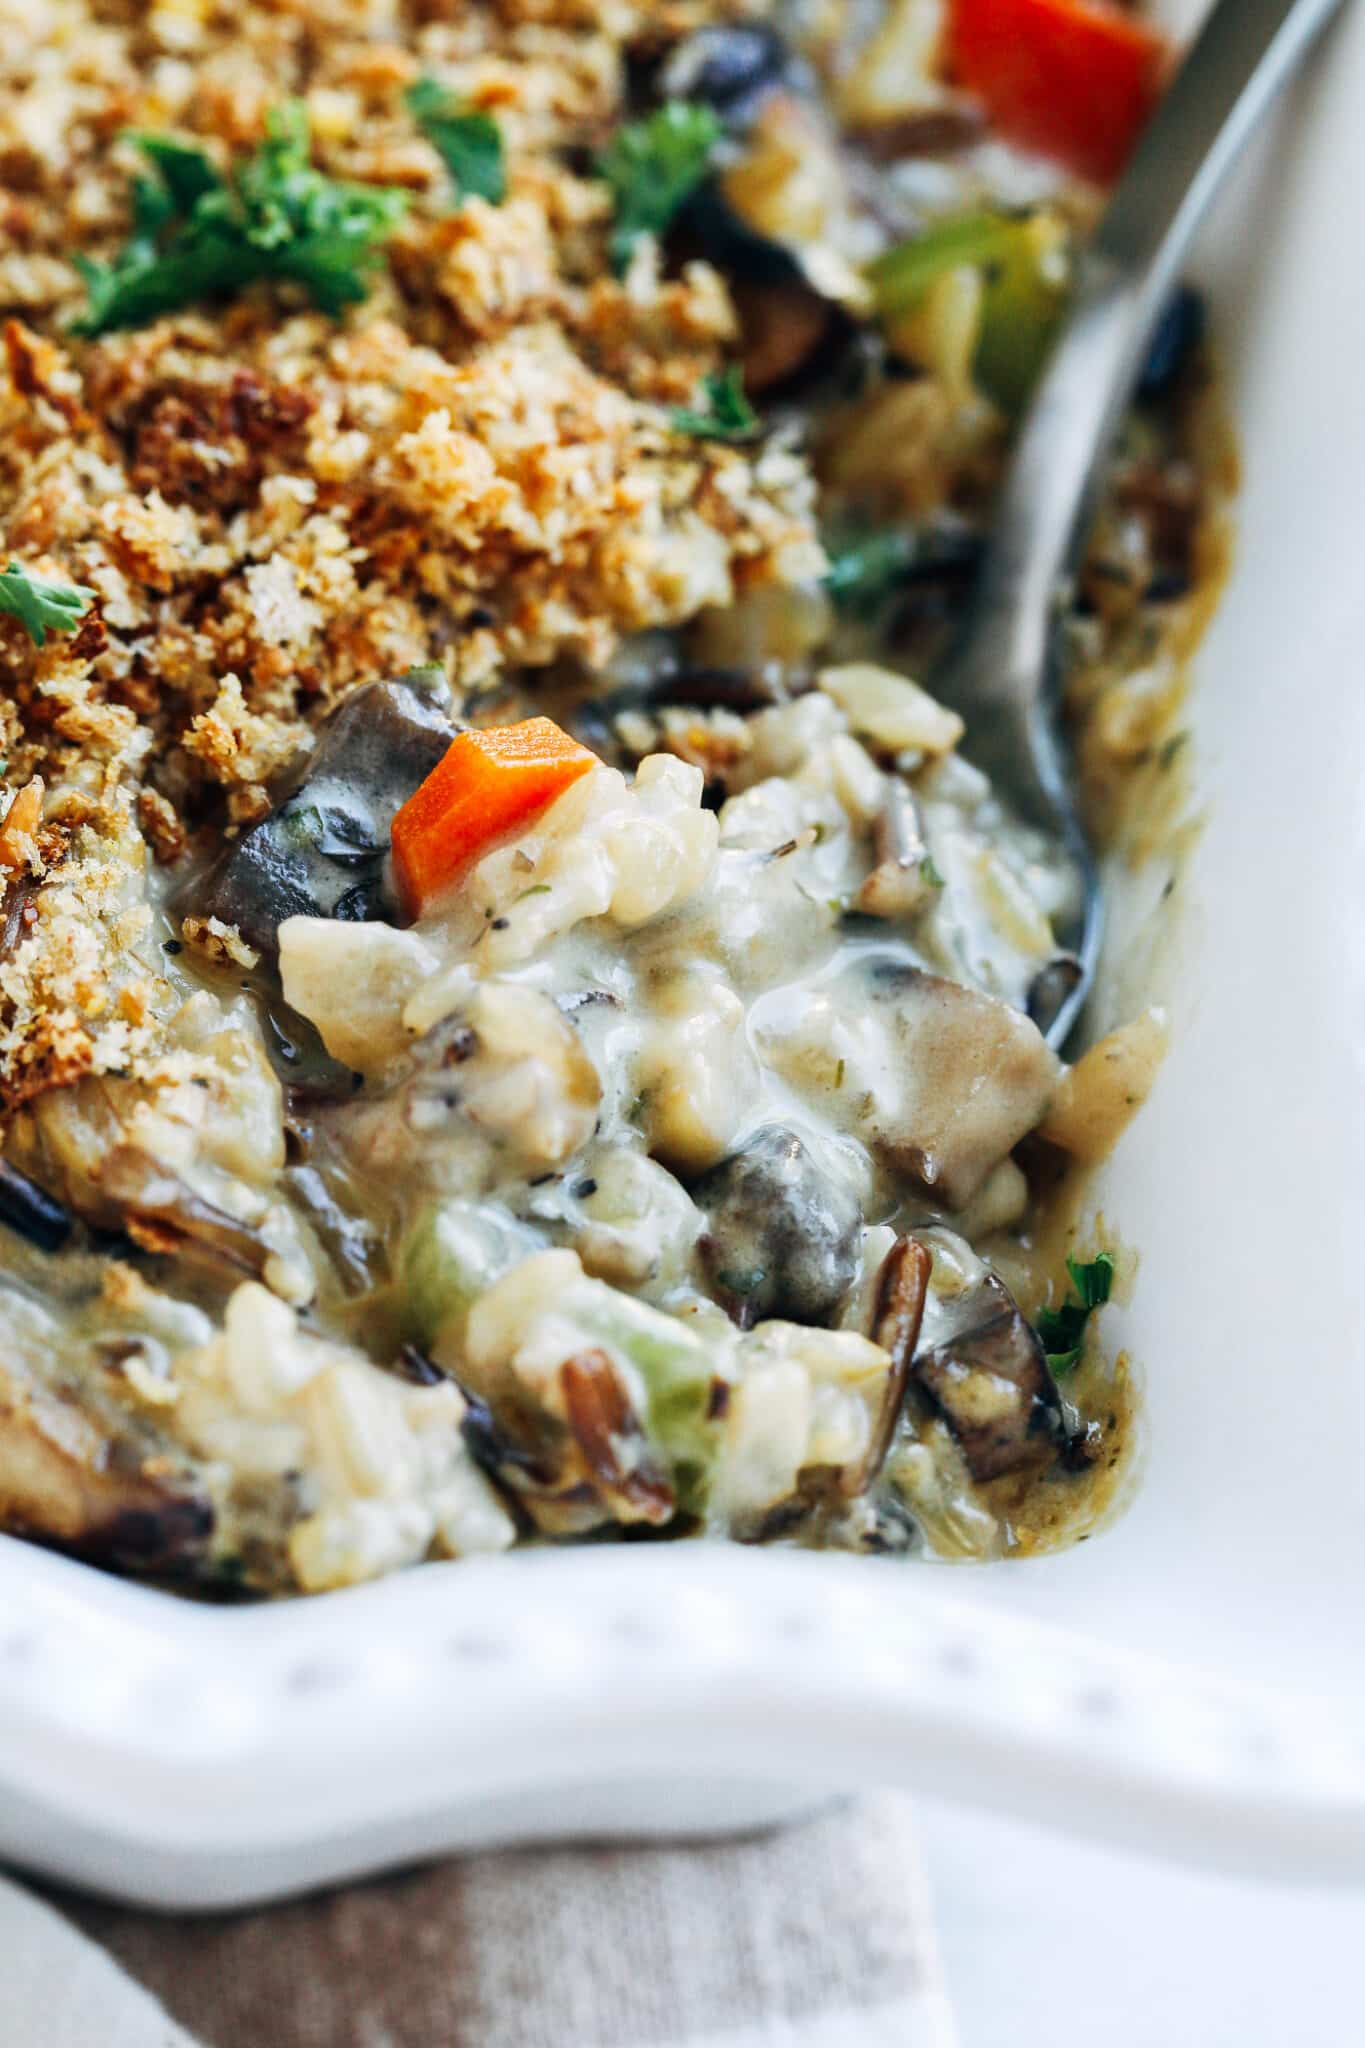 scooping out a serving of Creamy Wild Rice and Mushroom Casserole